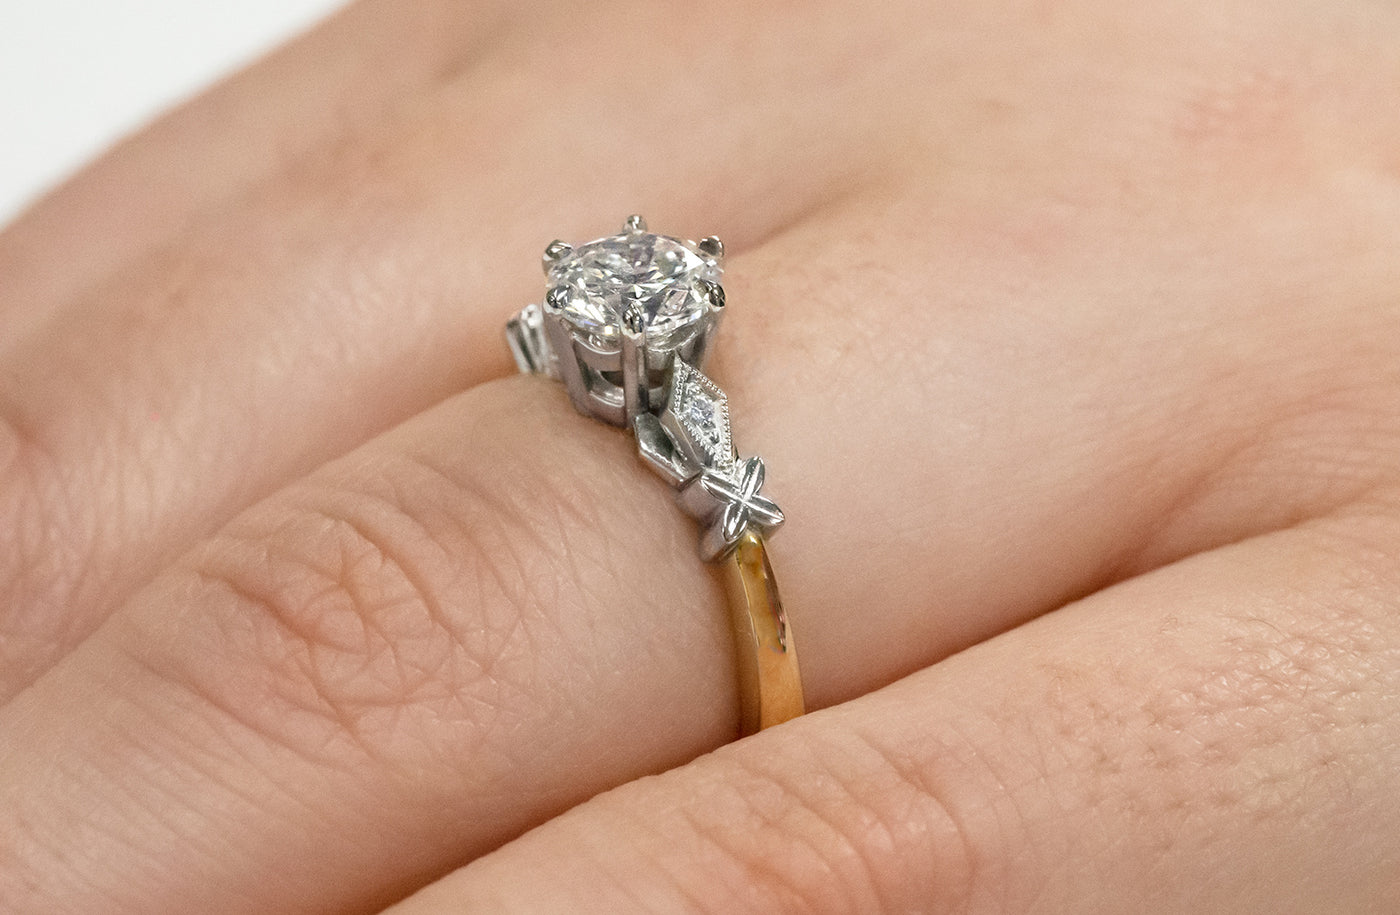 celtic inspired, diamond solitaire engagement ring, 18k, 18ct yellow gold, platinum setting, jewellery, jewelry, narrative collection, ring design, specialist, millgrain edge, deco style shoulders , ring on hand